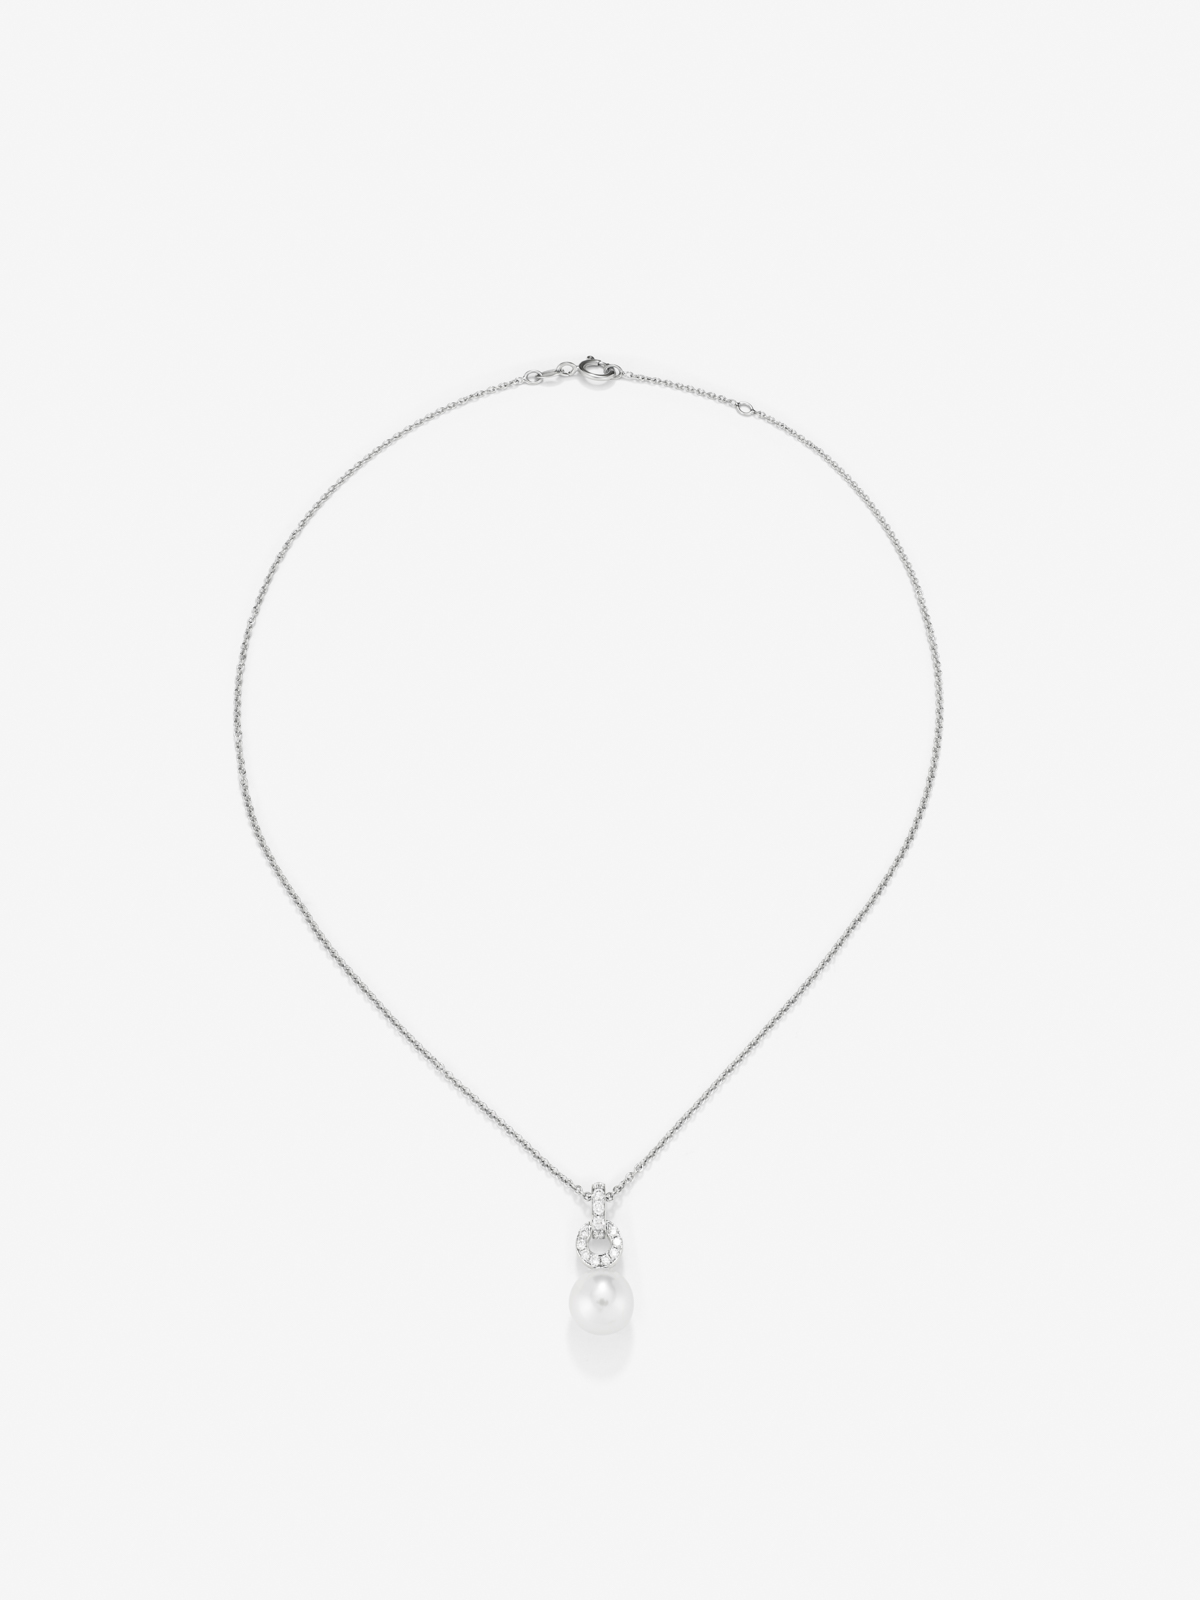 18k white gold chain pendant with a diamond hoop and 9.5mm Australian pearl